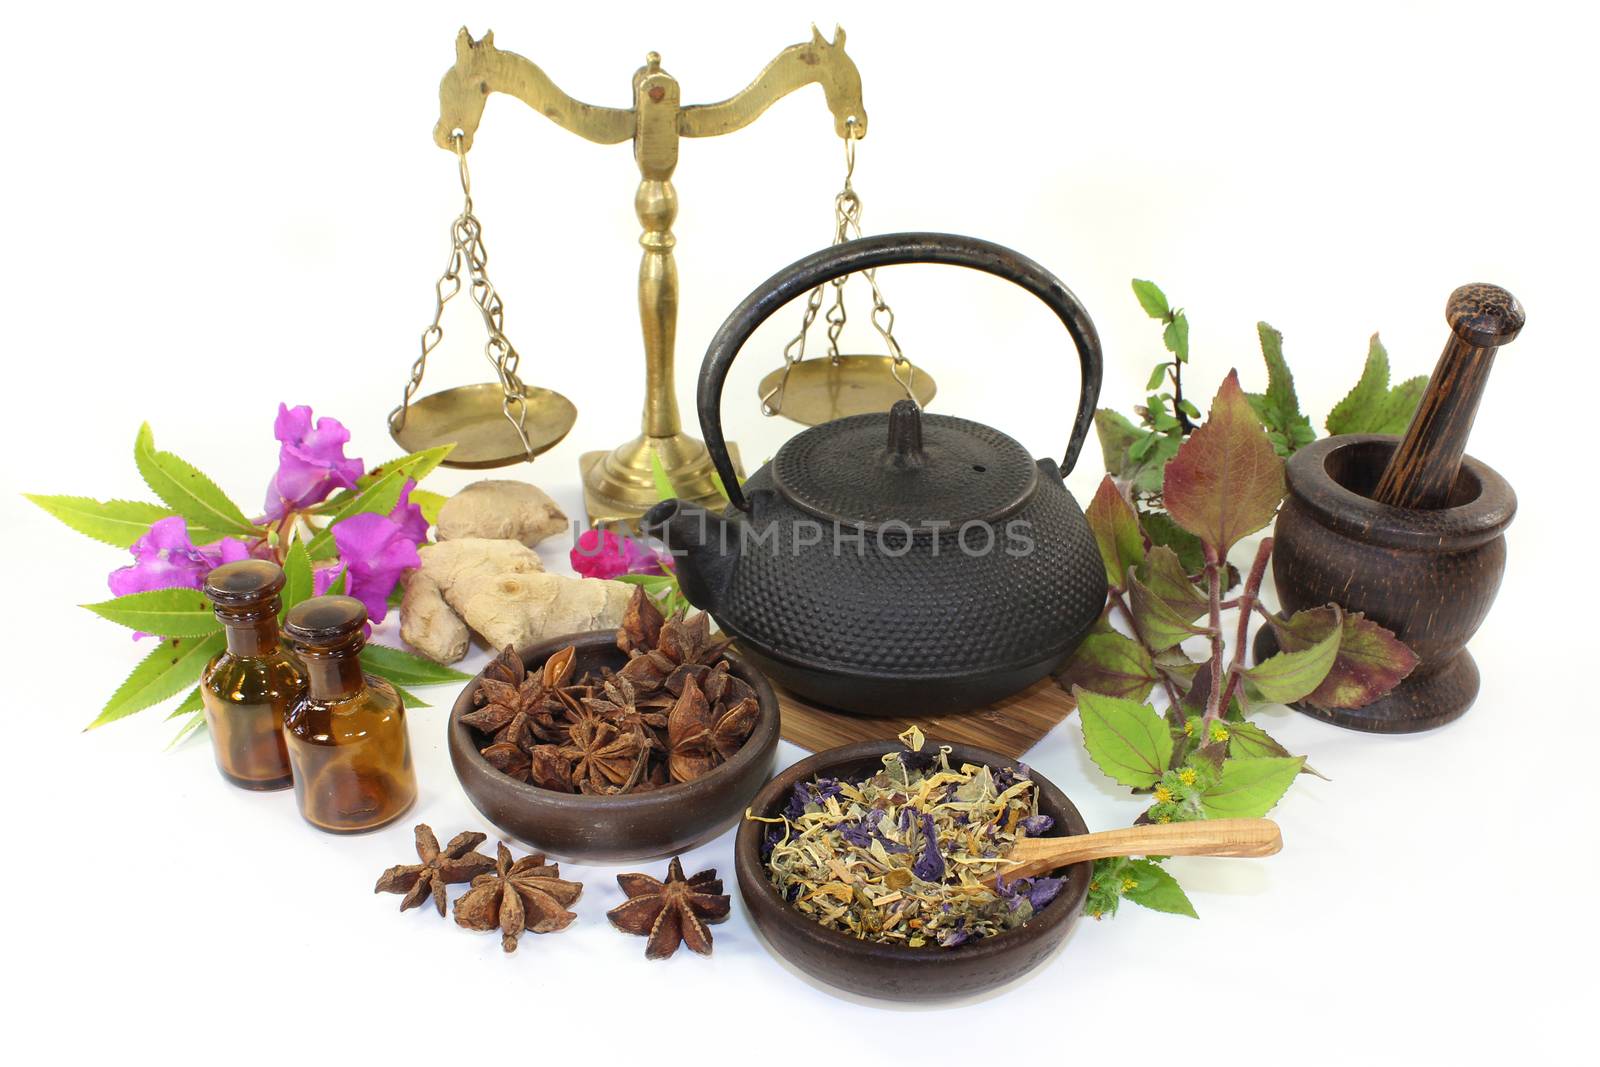 Chinese Medicine by silencefoto